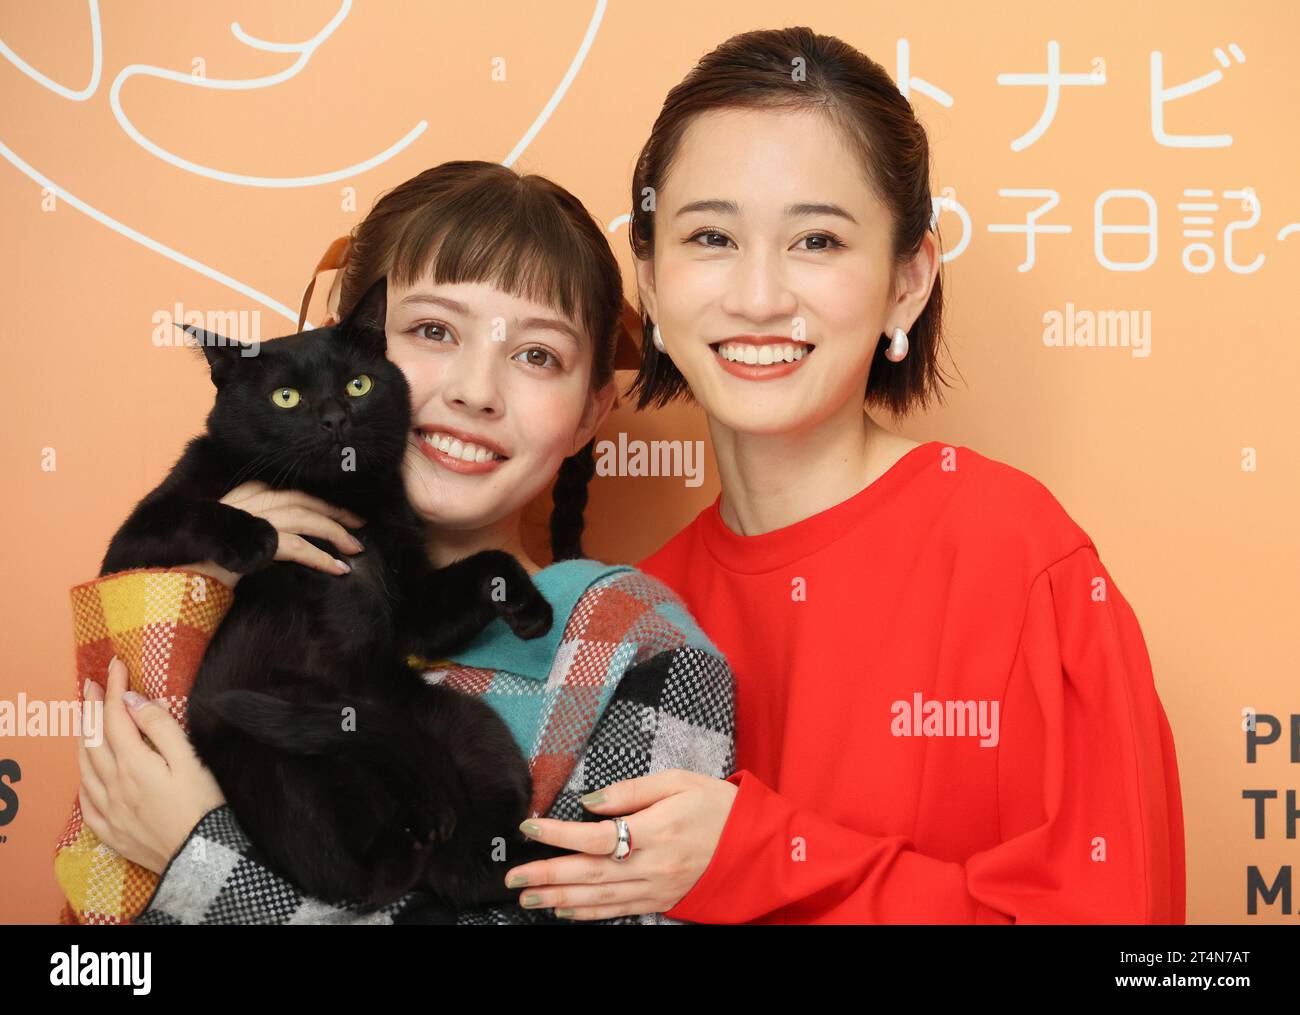 Tokyo, Japan. 1st Nov, 2023. Japanese actress Atsuko Maeda (R) and model Nana Kato attend a promotional event of the smartphone app of healthcare and entertainment for cats and dogs 'Petnavi' in Tokyo on Wednesday, November 1, 2023. (photo by Yoshio Tsunoda/AFLO) Stock Photo